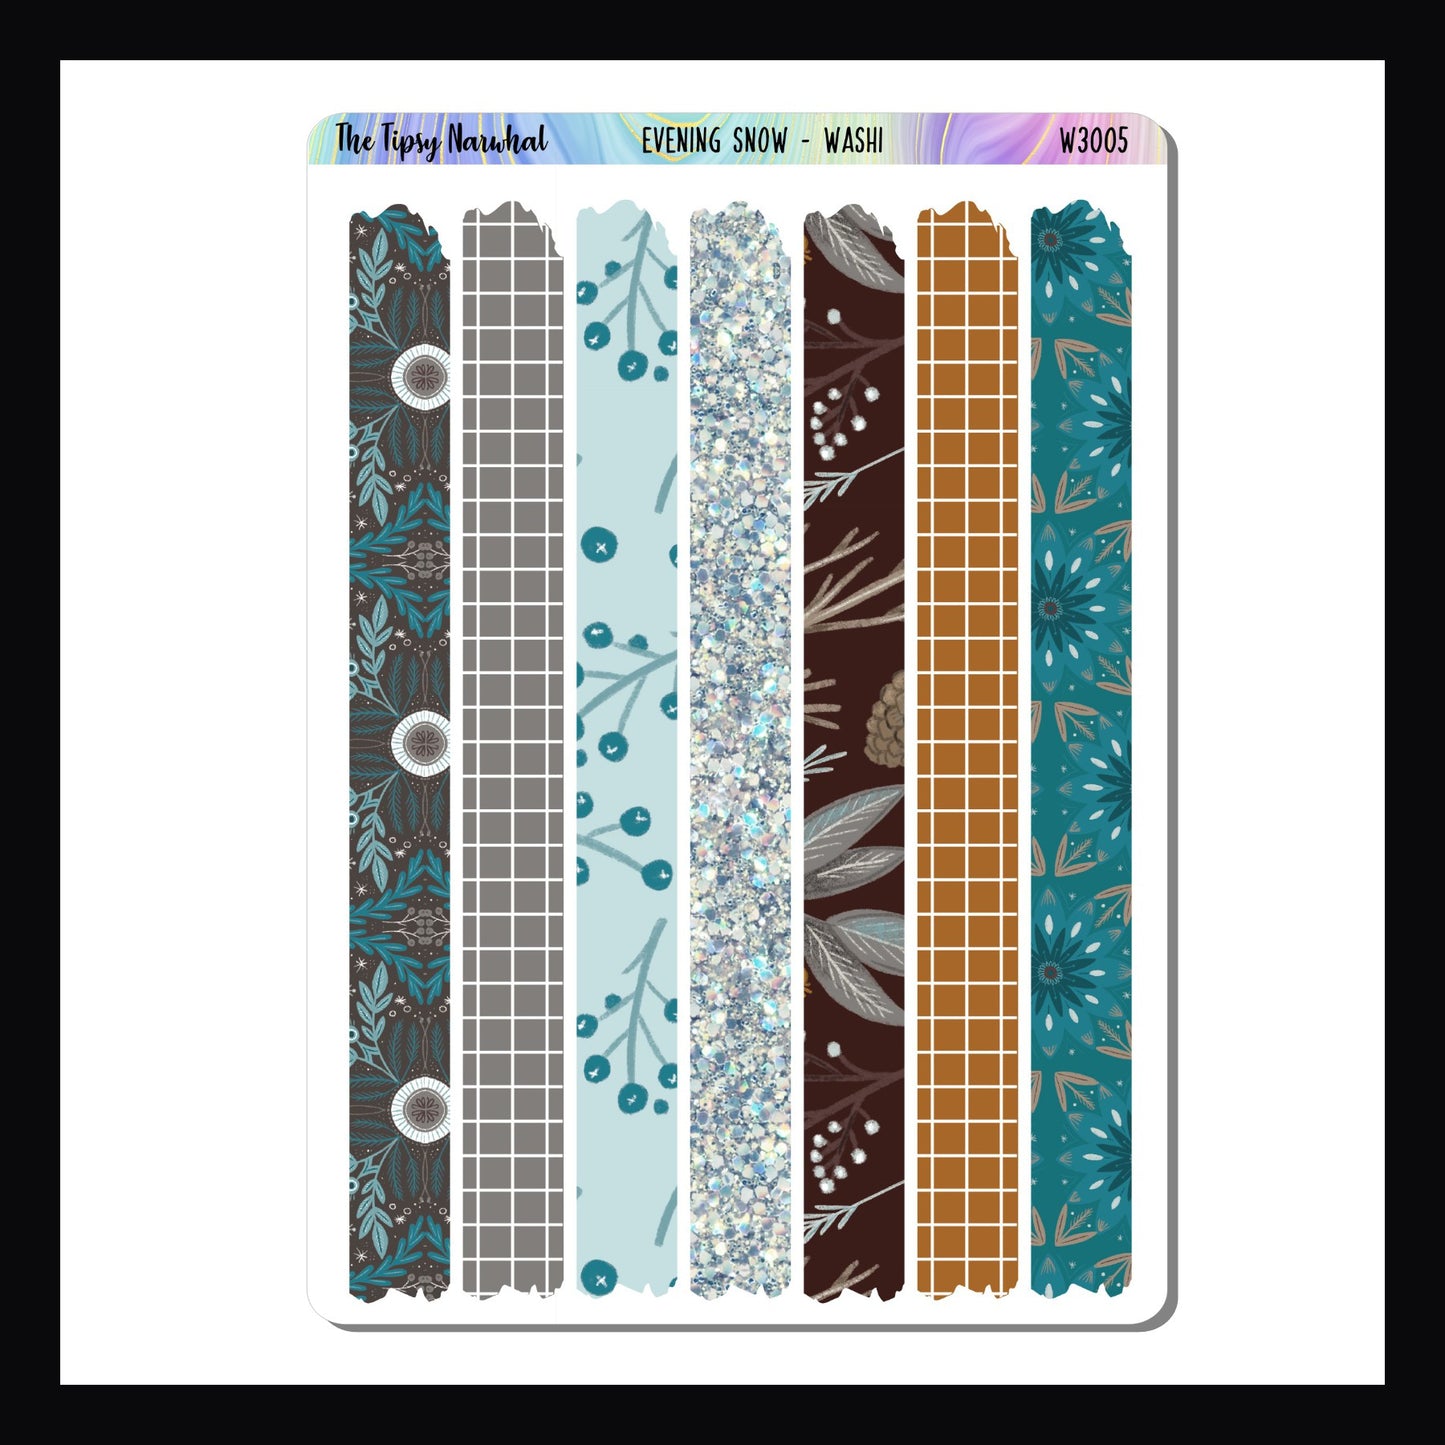 Evening Snow Washi Sheet.  Features 7 strips of washi that coordinate with the Evening Snow sticker kits.